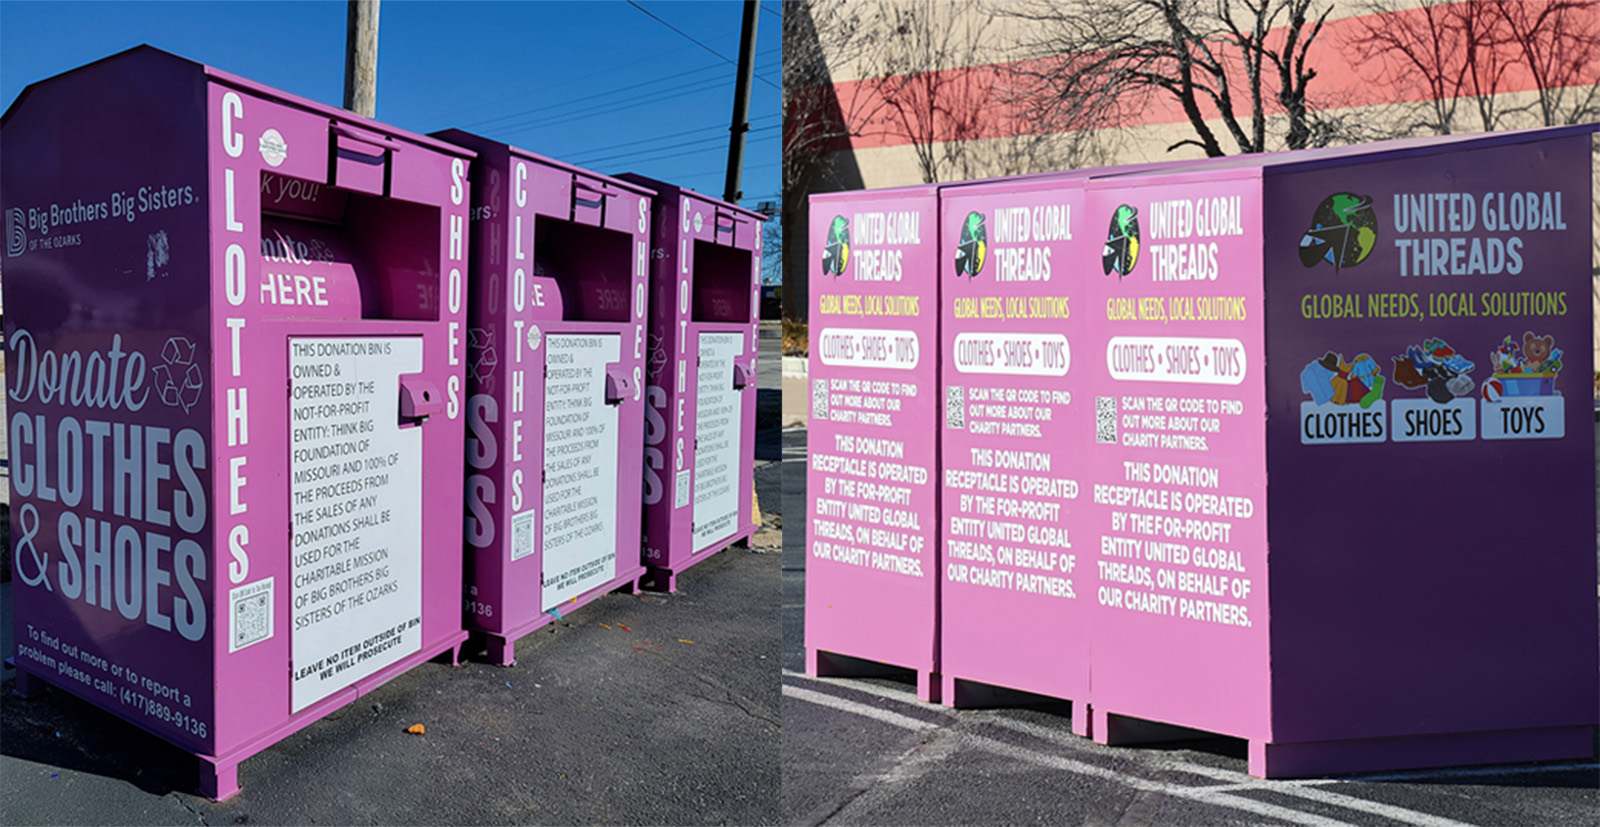 For-profit vs. nonprofit: Two companies' donation bins may cause confusion